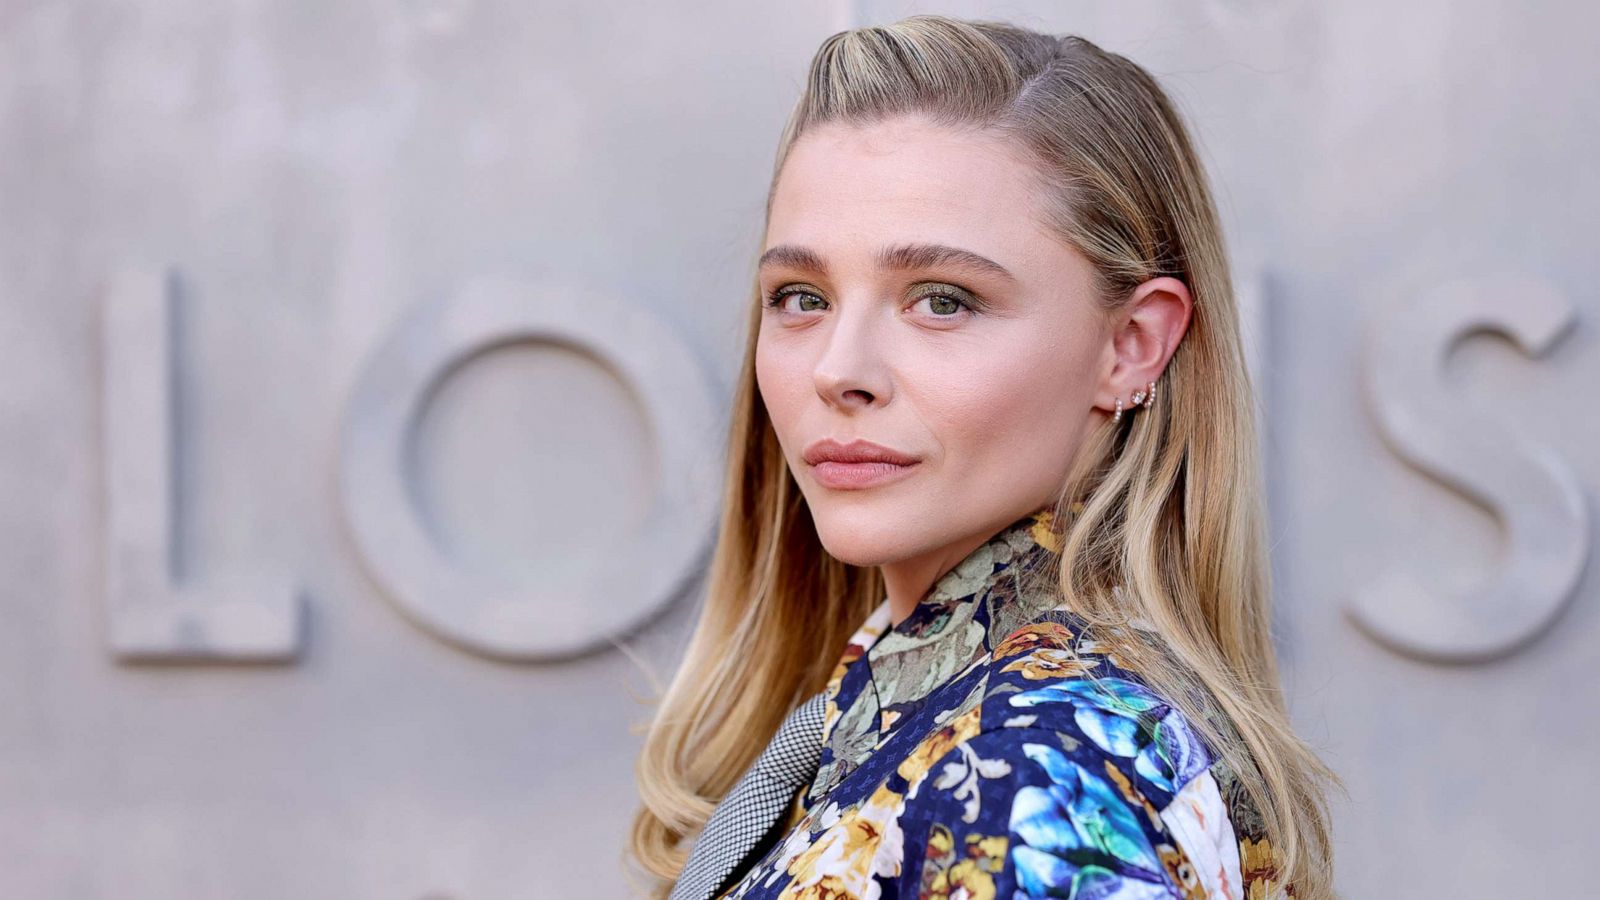 The kid behind Chloe Grace Moretz looks like a man in his 30's : r